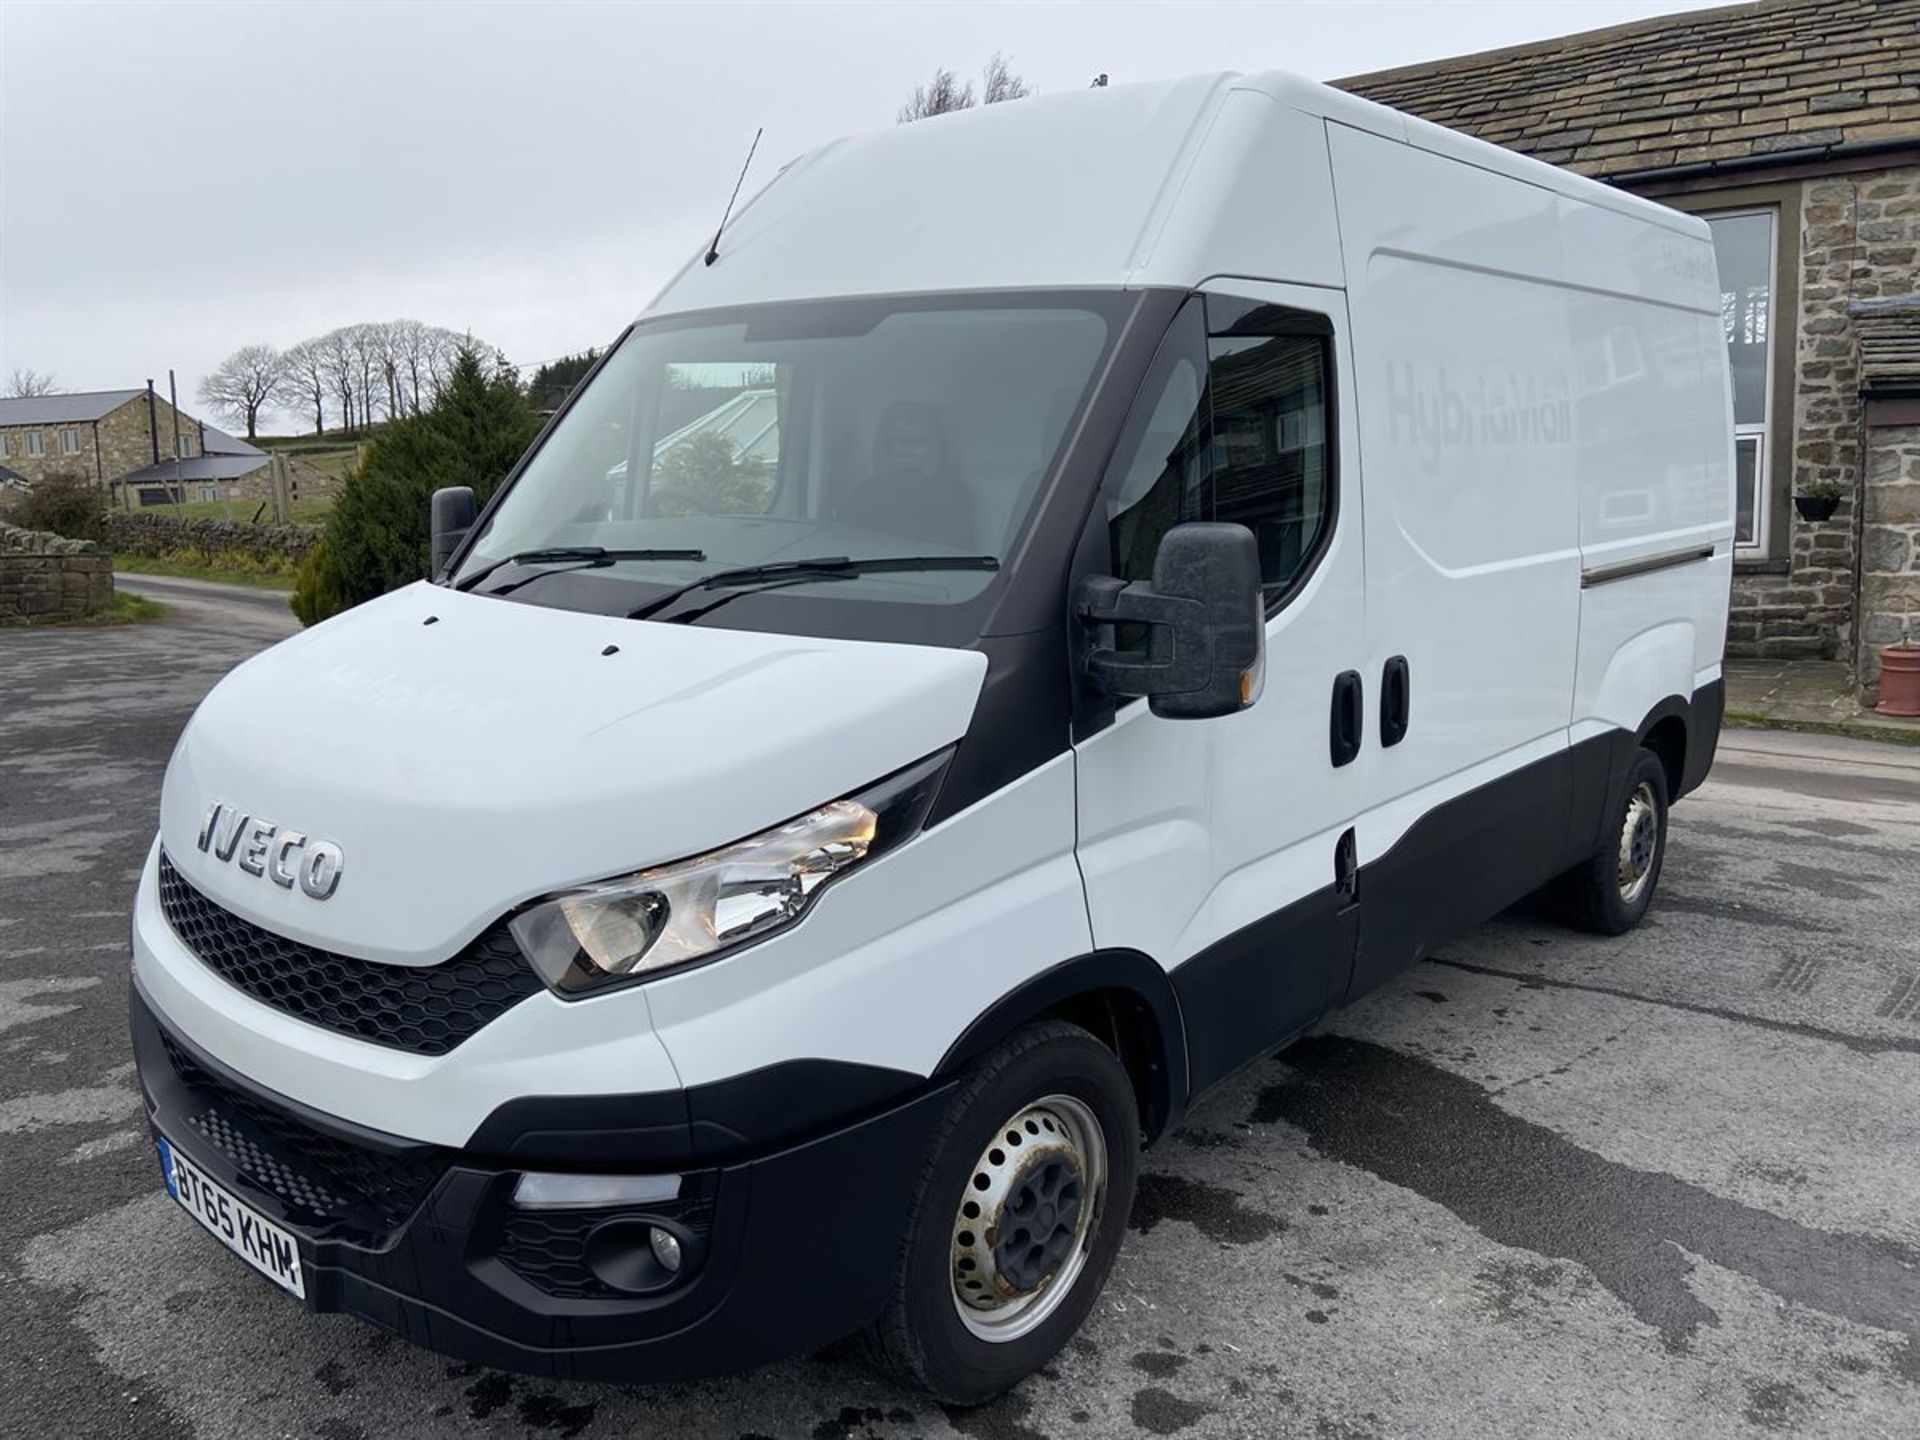 20105/65 IVECO DAILY 35S13 DIESEL 2.3 HIGH ROOF VAN 3520 WB (2287 cc) - Image 7 of 12